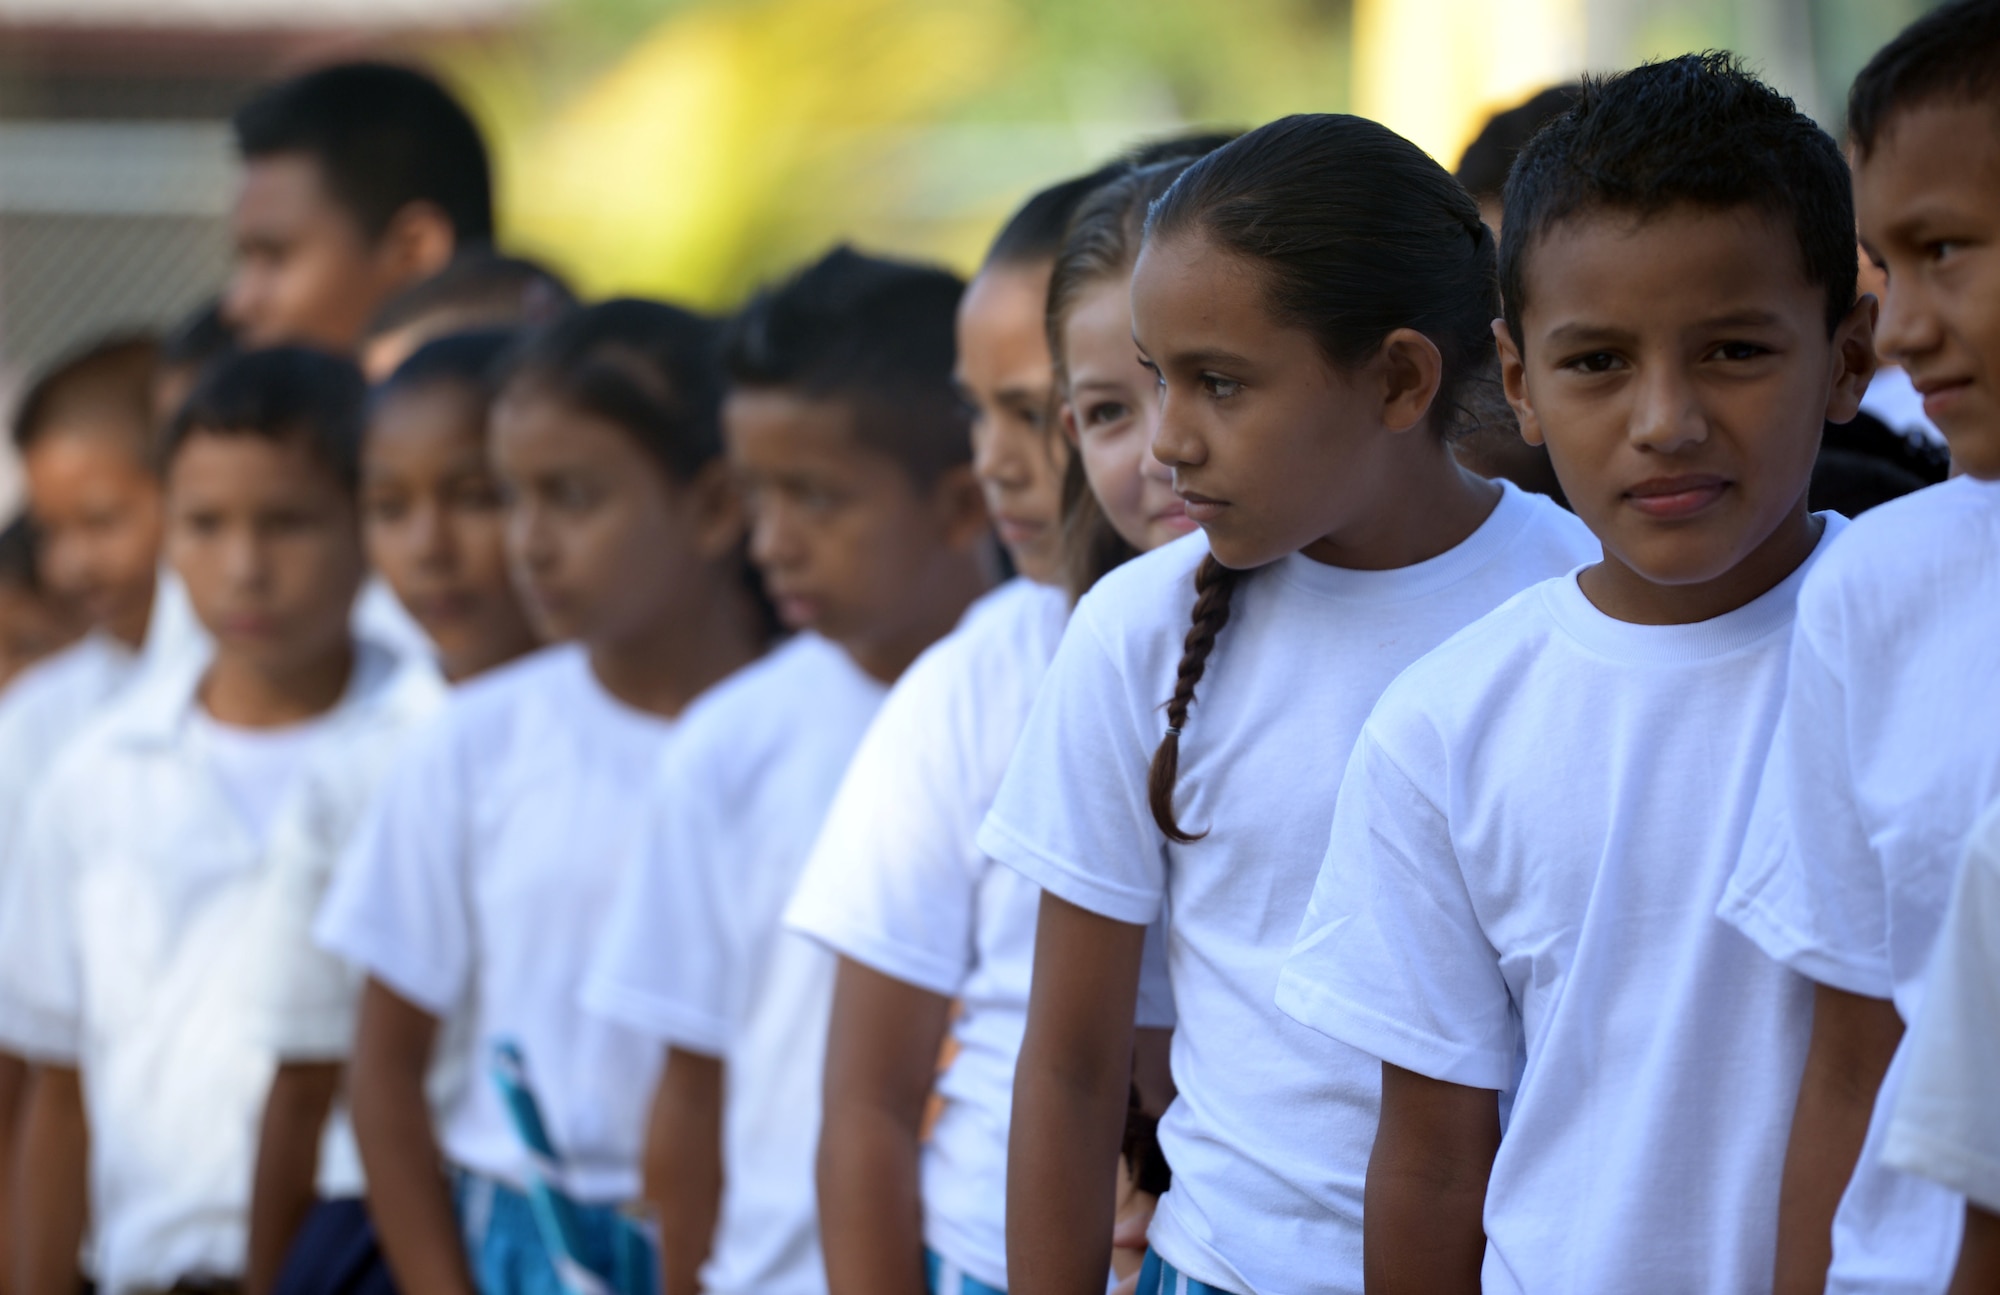 Gabirela Mistral students watch the groundbreaking ceremony at the Gabriela Mistral school in Ocotoes Alto, Honduras, June 1, 2015. The children performed a number of dance routines as part of the ceremony which also marked the first day of the New Horizons Honduras 2015 training exercise taking place in and around the Trujillo and Tocoa areas. New Horizons was launched in the 1980s and is an annual joint humanitarian assistance exercise that U.S. Southern Command conducts with a partner nation in Central America, South America or the Caribbean. The exercise improves joint training readiness of U.S. and partner nation civil engineers, medical professionals and support personnel through humanitarian assistance activities. (U.S. Air Force photo by Capt. David J. Murphy/Released)